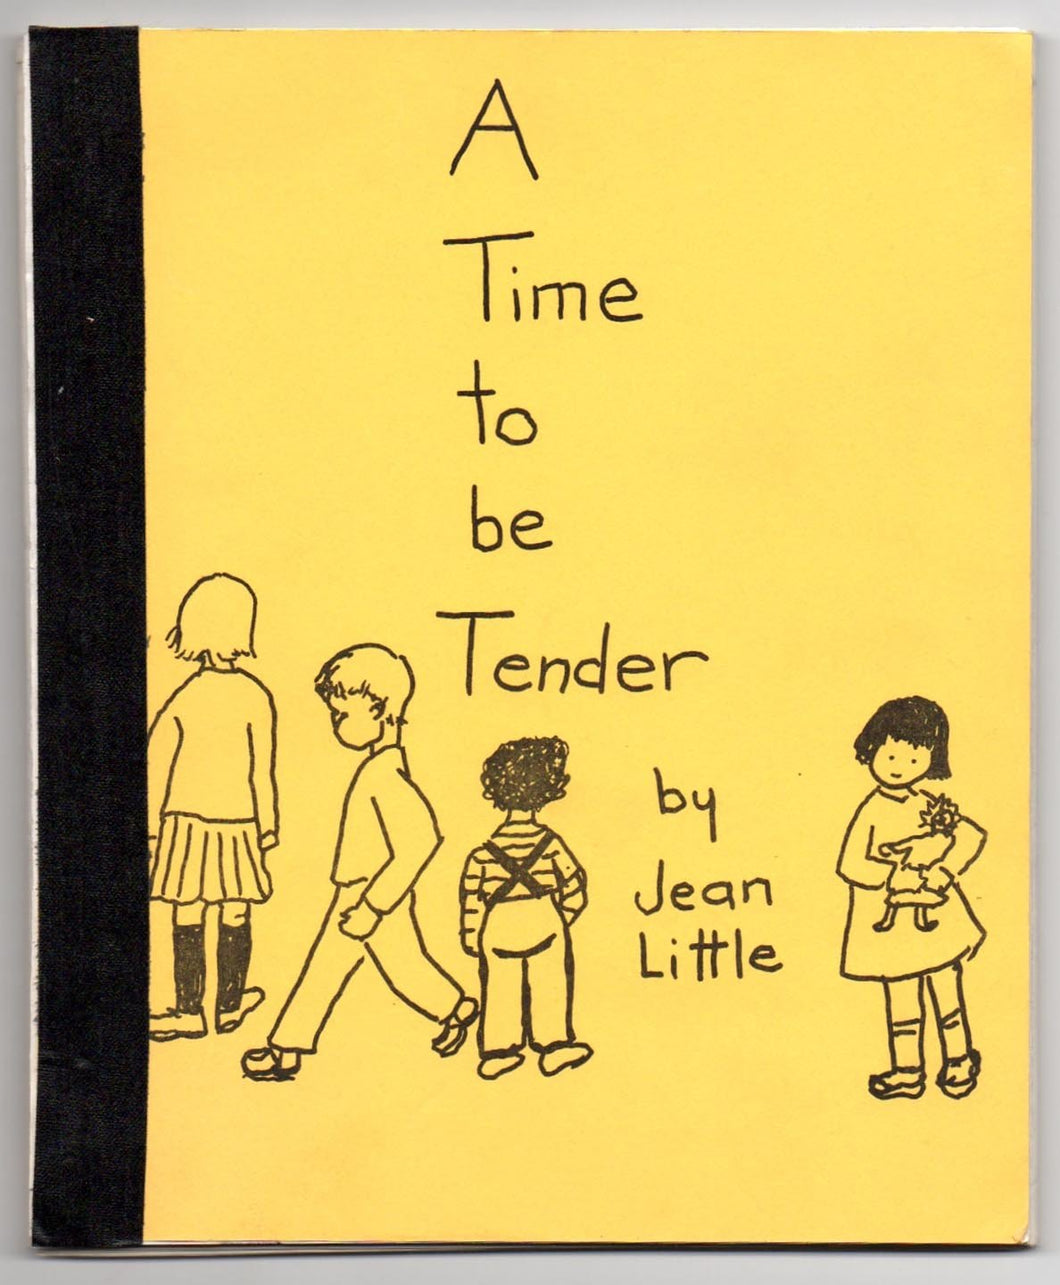 A Time to be Tender: Poems of Childhood